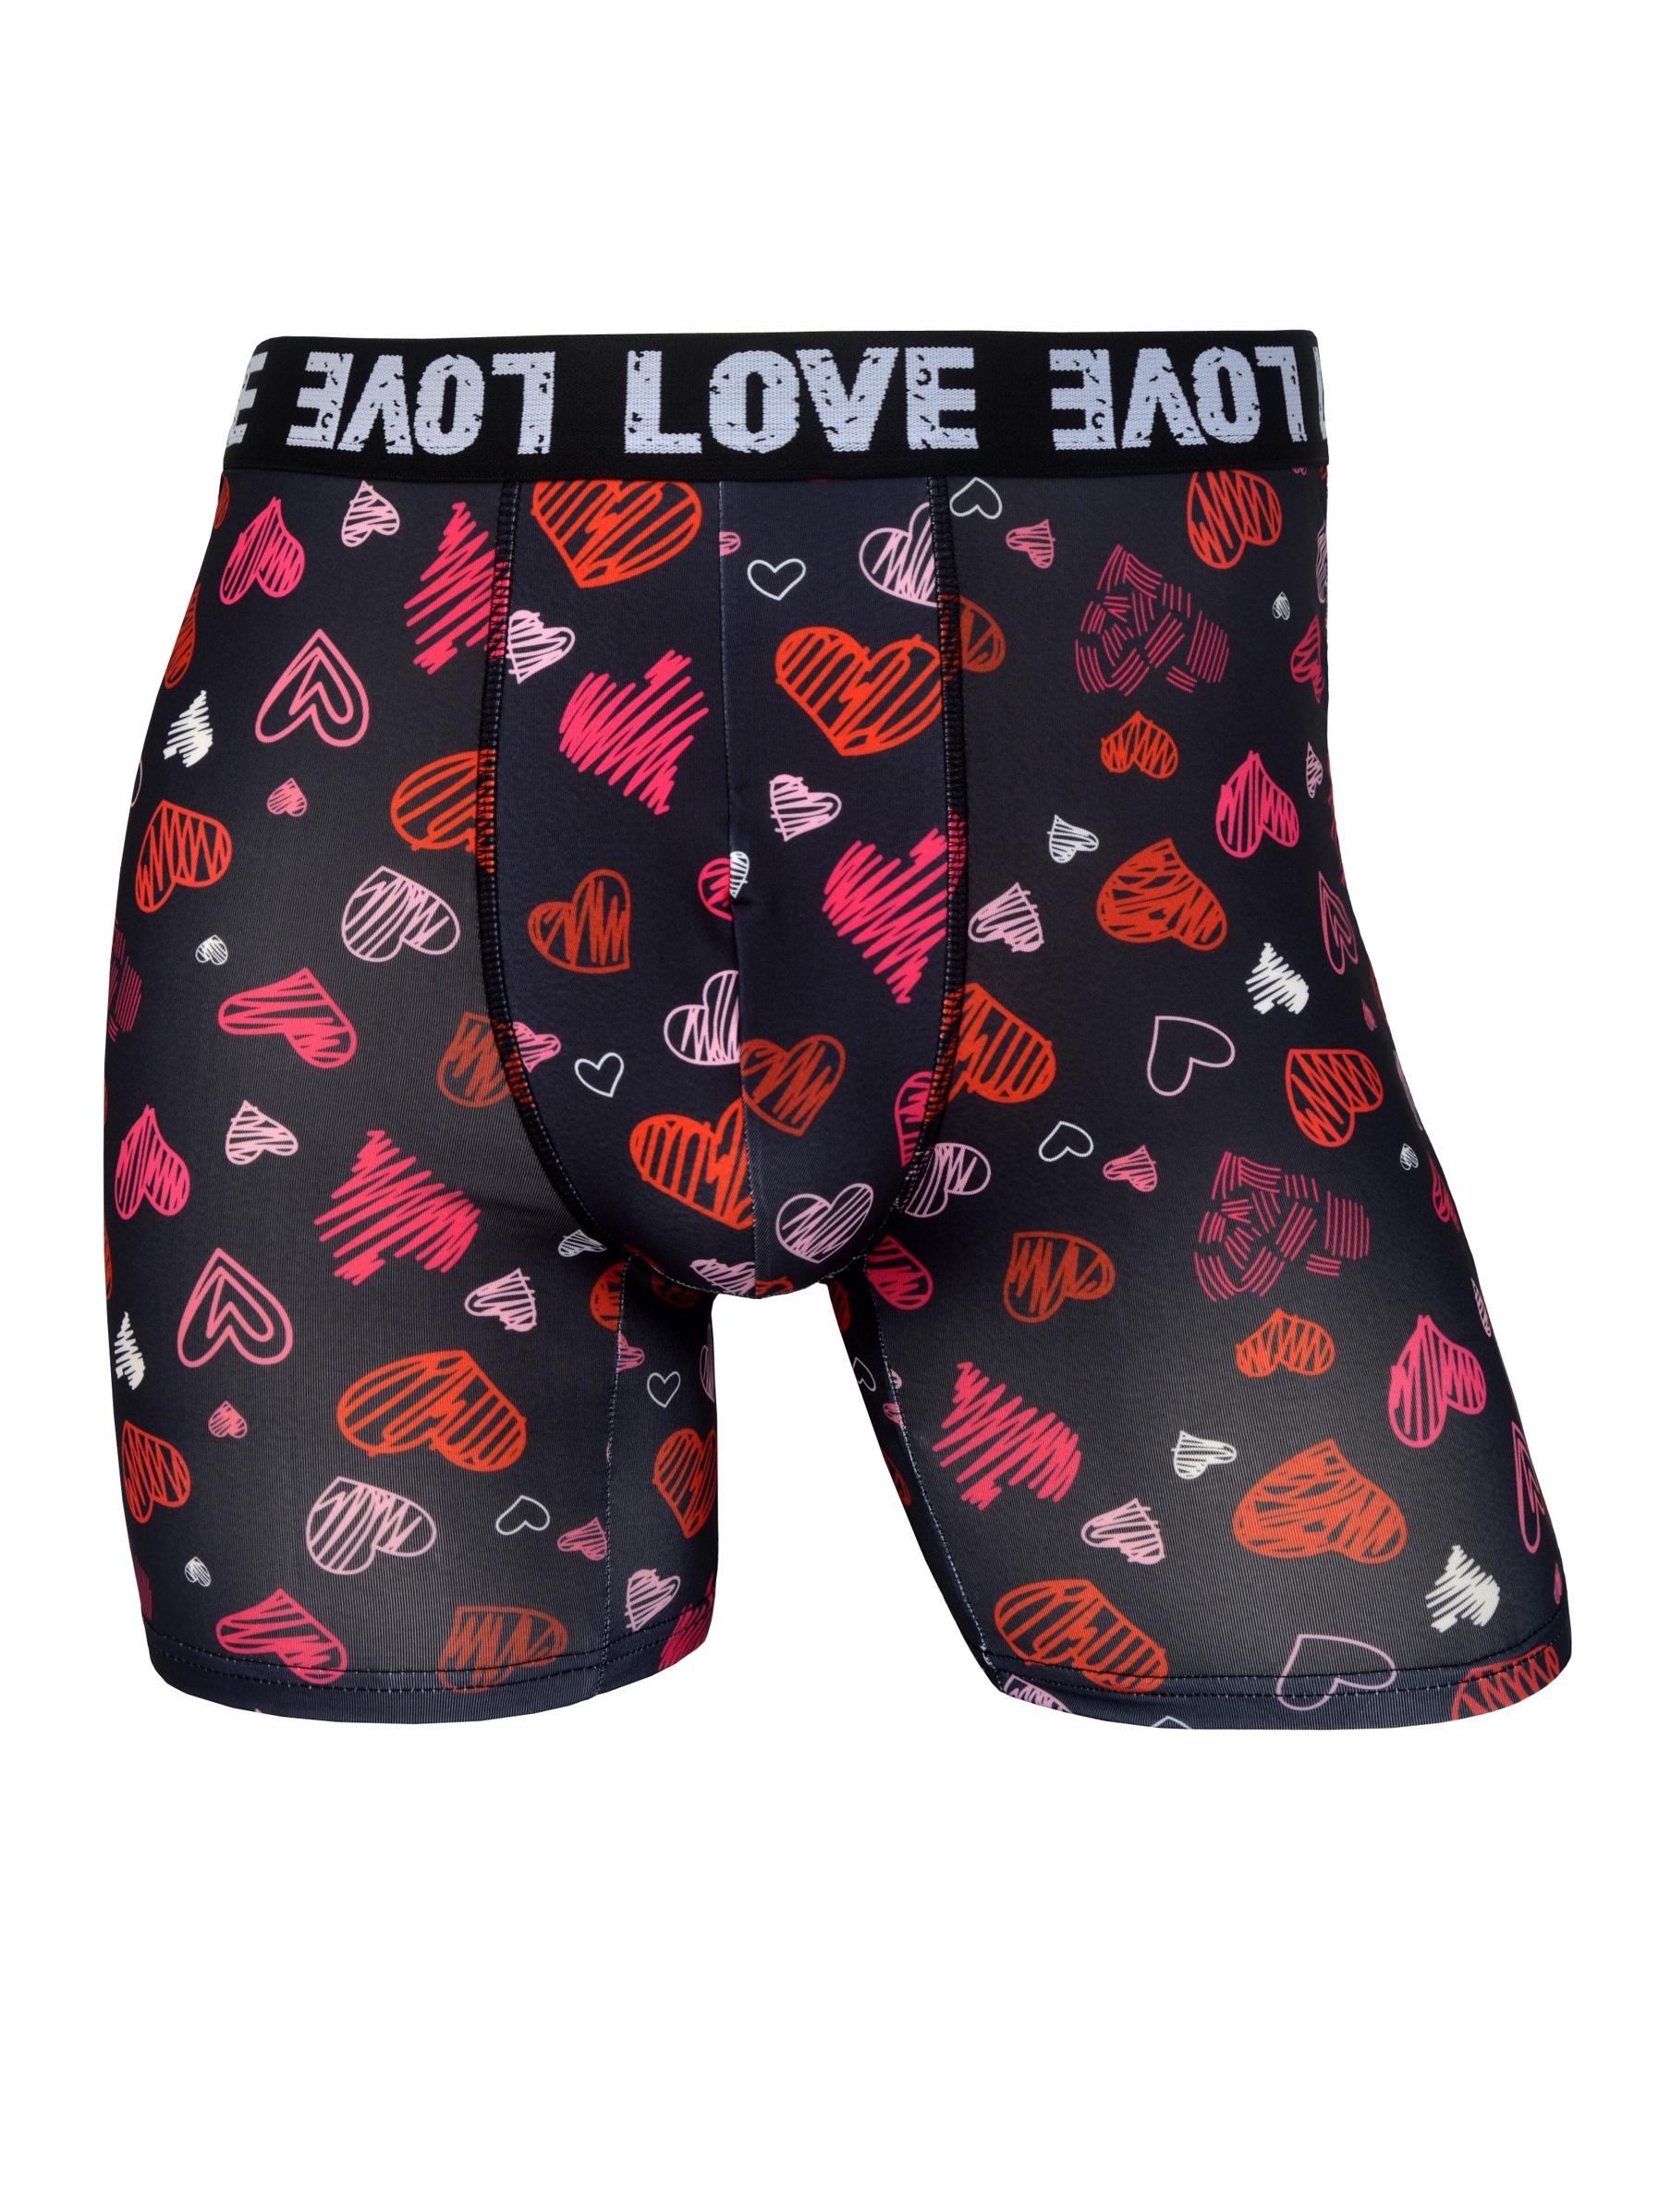 Express Love with Style: Lips and Heart Custom Face Panties for Valentine's  Day